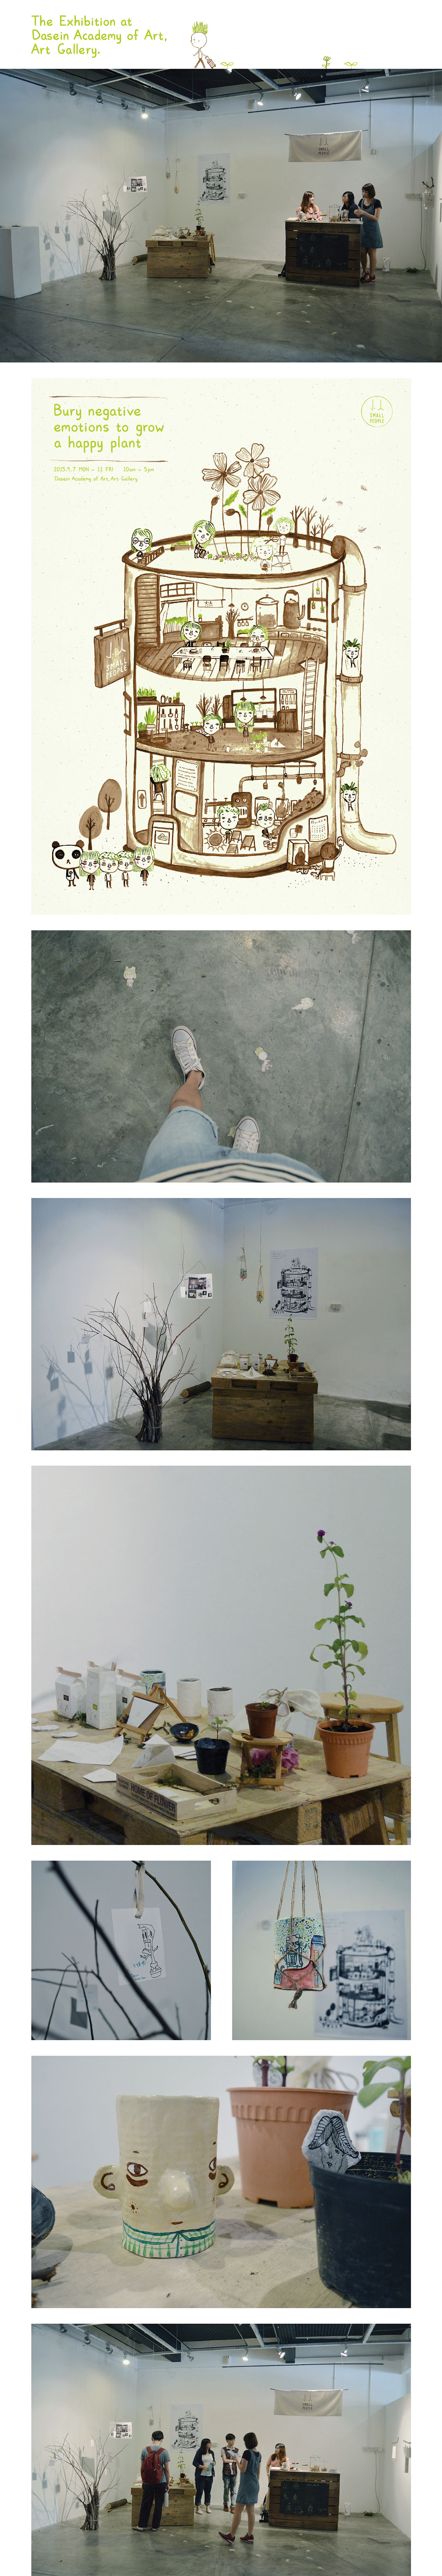 small people 小人 Positive heal Plant Nature eco friendly Exhibition 